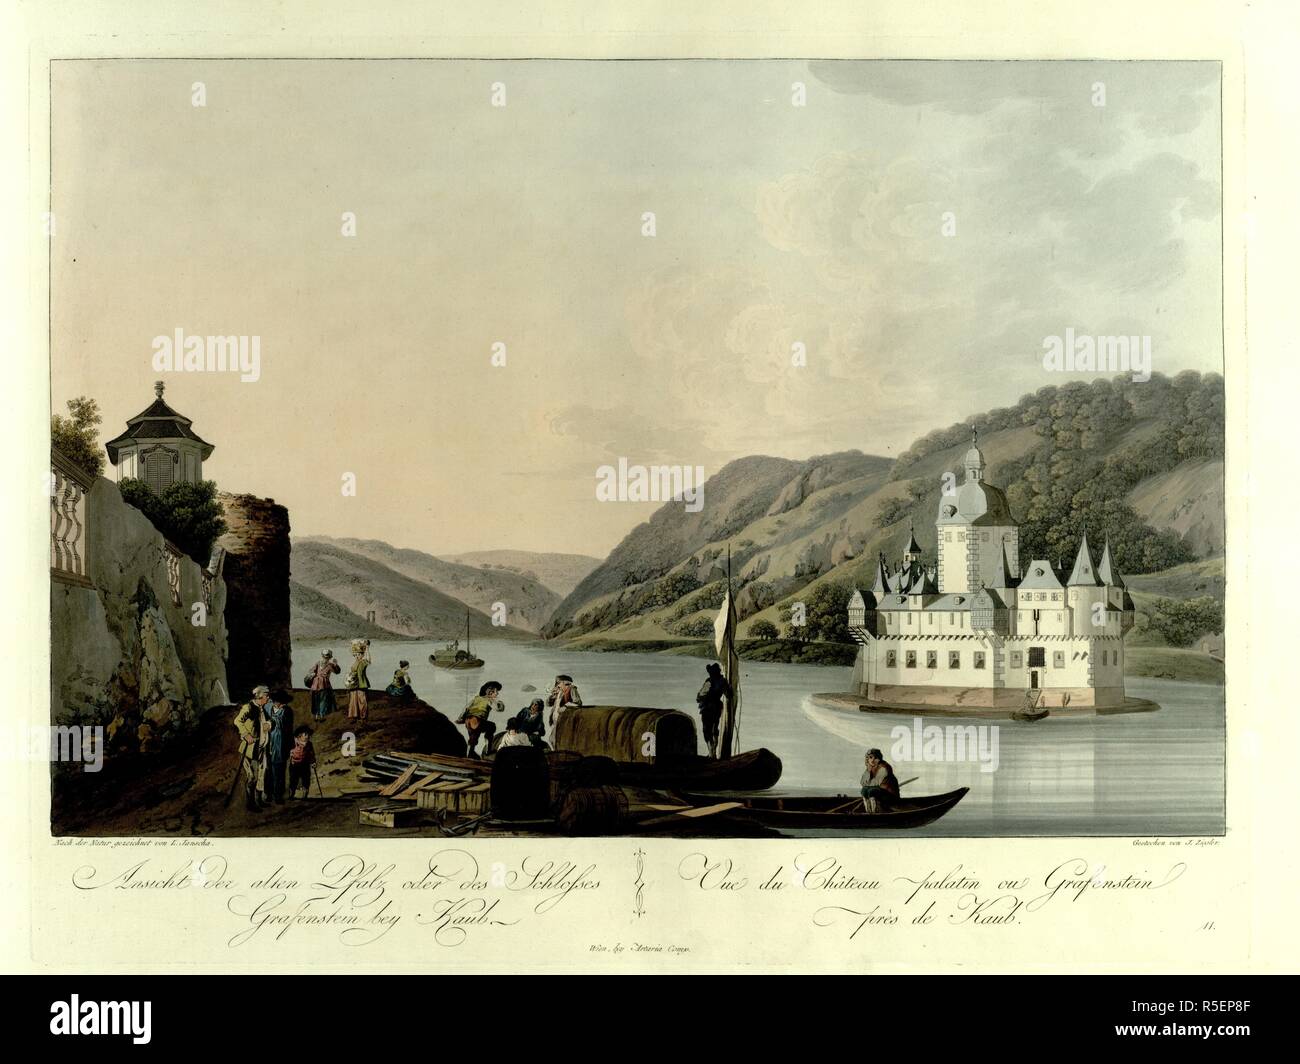 A group of sailors smoke and rest surrounded by barrels and crates on two boats moored by a walled garden in the town of Kaub in the foreground on the left. A view of Pfalzgrafenstein Castle on Falkenau Island on the right, and the River Rhine and hills in the background. Ansicht der alten Pfalz oder des Schlosses Grafenstein bey Kaub = Vue du ChÃ¢teau palatin ou Grafenstein prÃ¨s de Kaub. Wien : bey Artaria Comp., [1798]. hand-coloured etching. Source: Maps 6.Tab.12, plate 16. Language: German and French. Author: Ziegler, J. Stock Photo